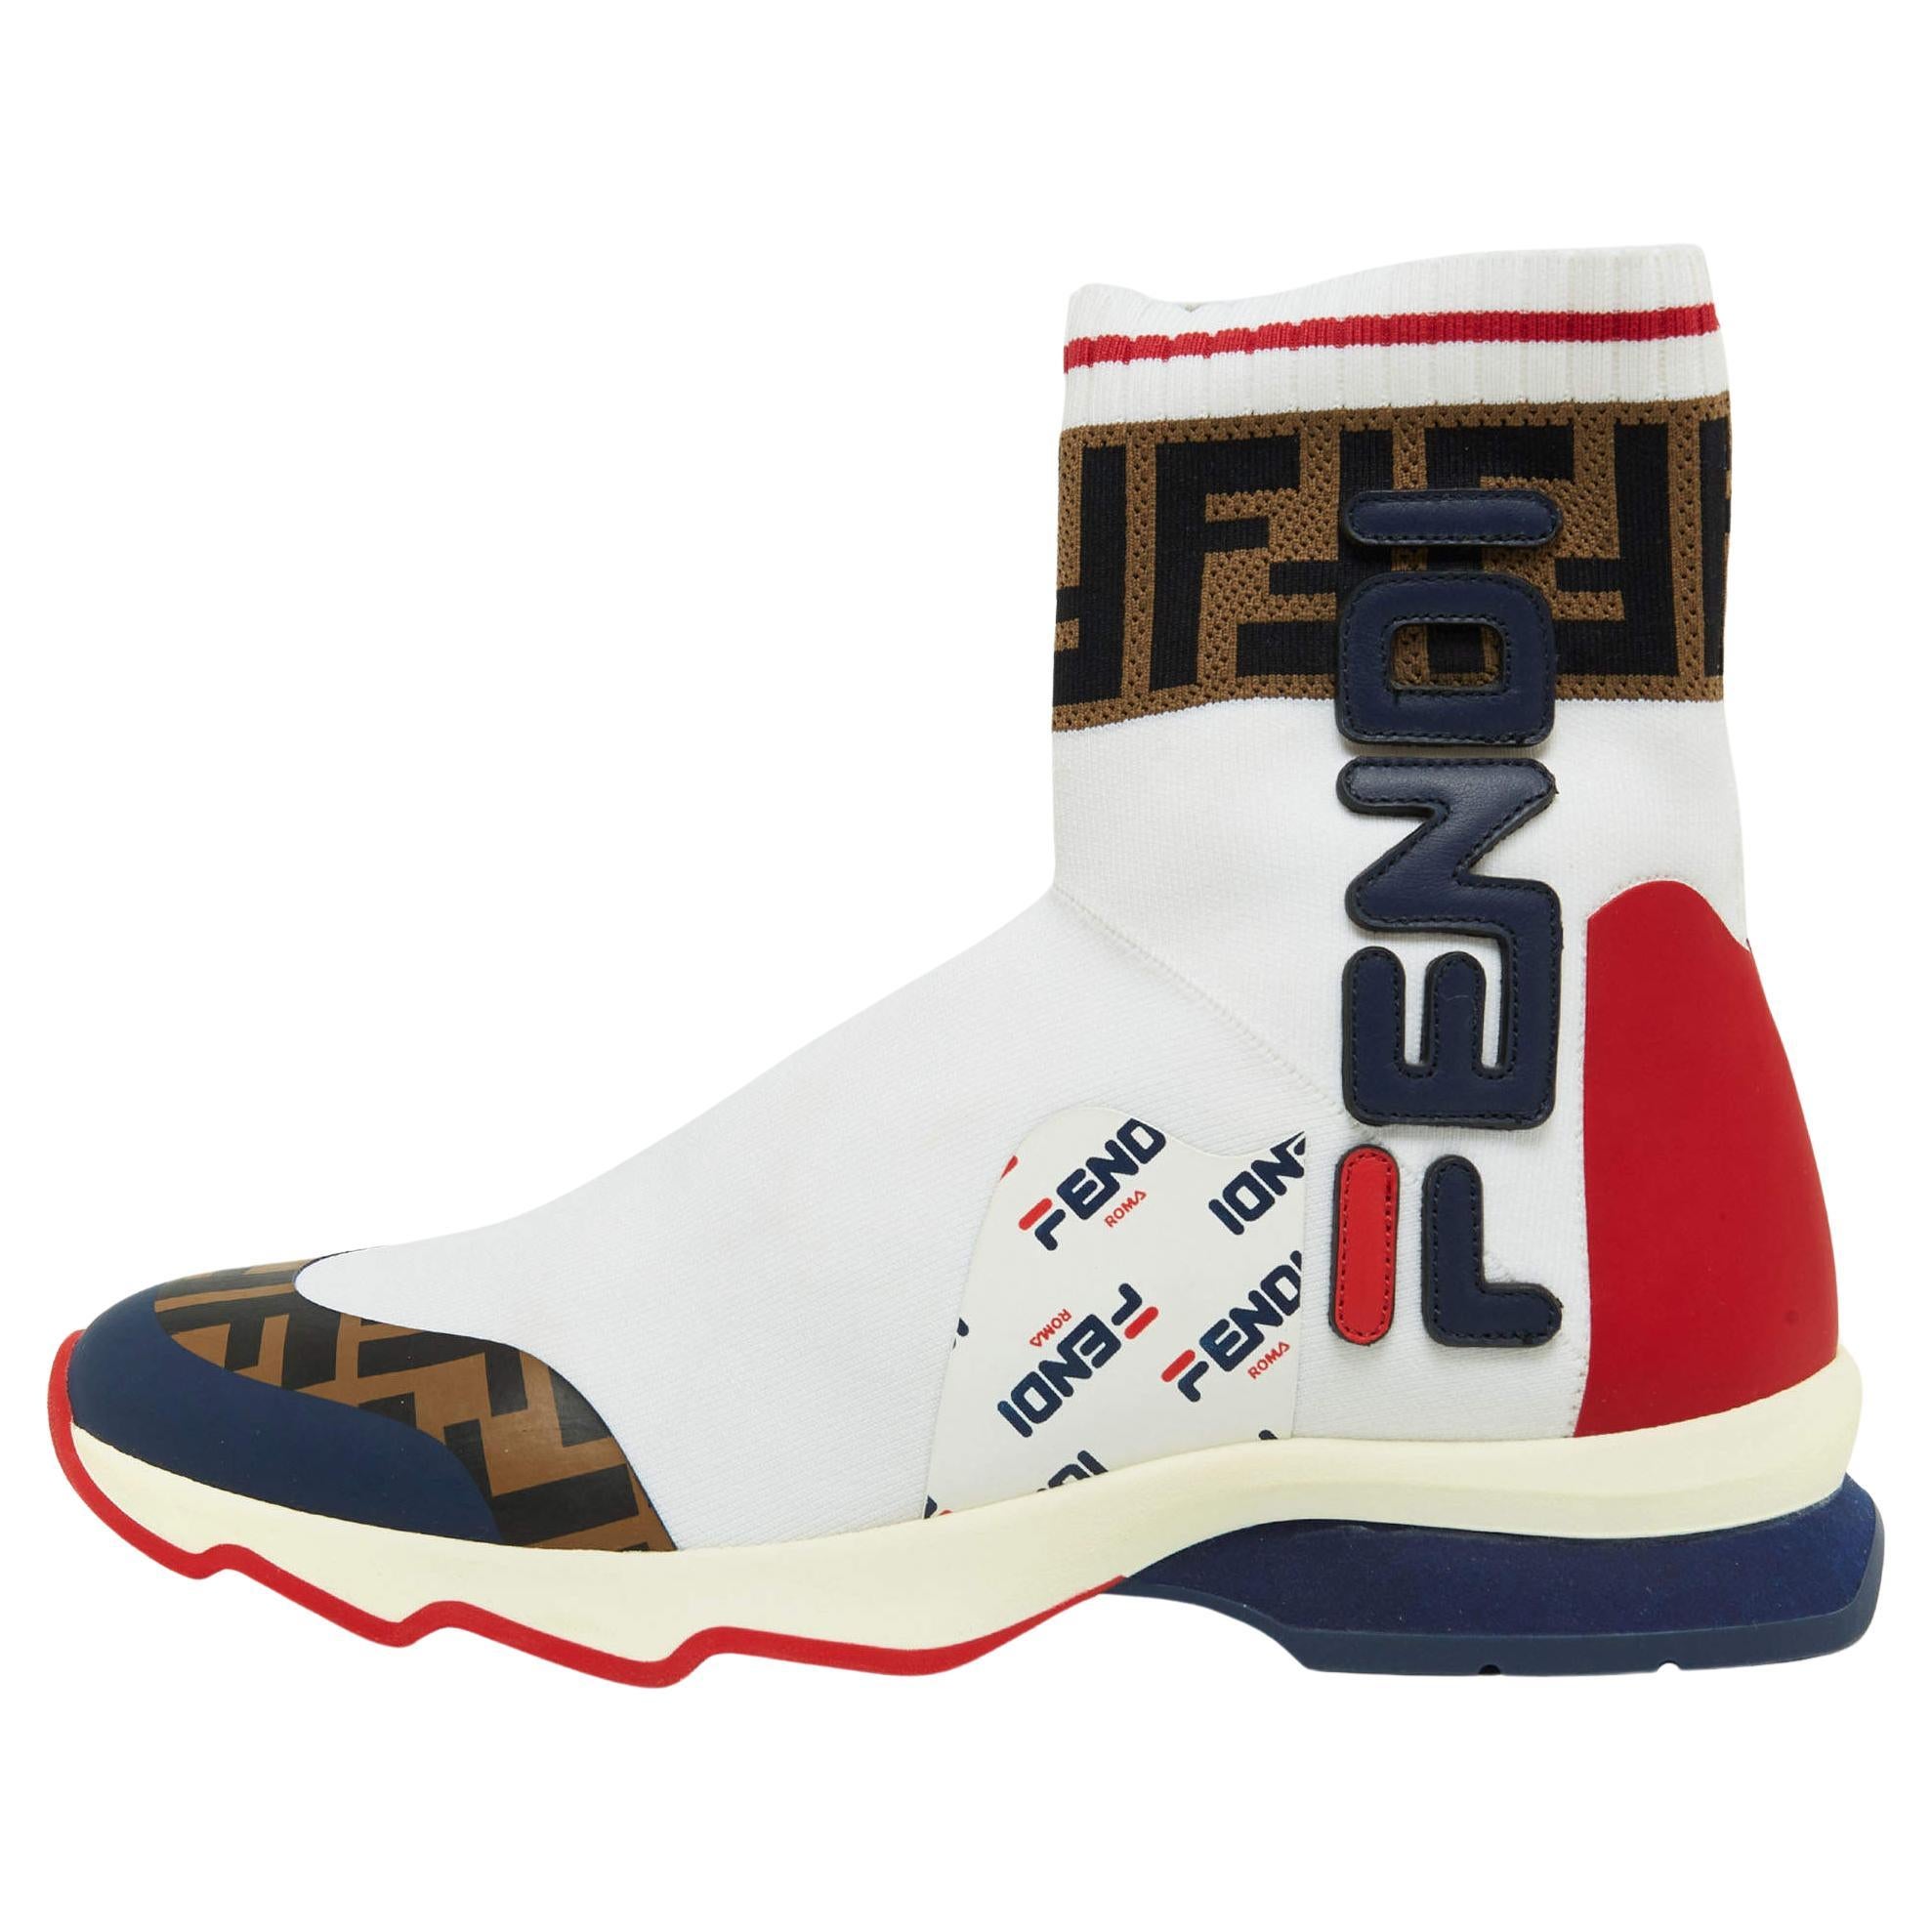 Fendi x Fila Tricolor Knit Fabric and Leather Mania Sock Sneakers Size 38 For Sale